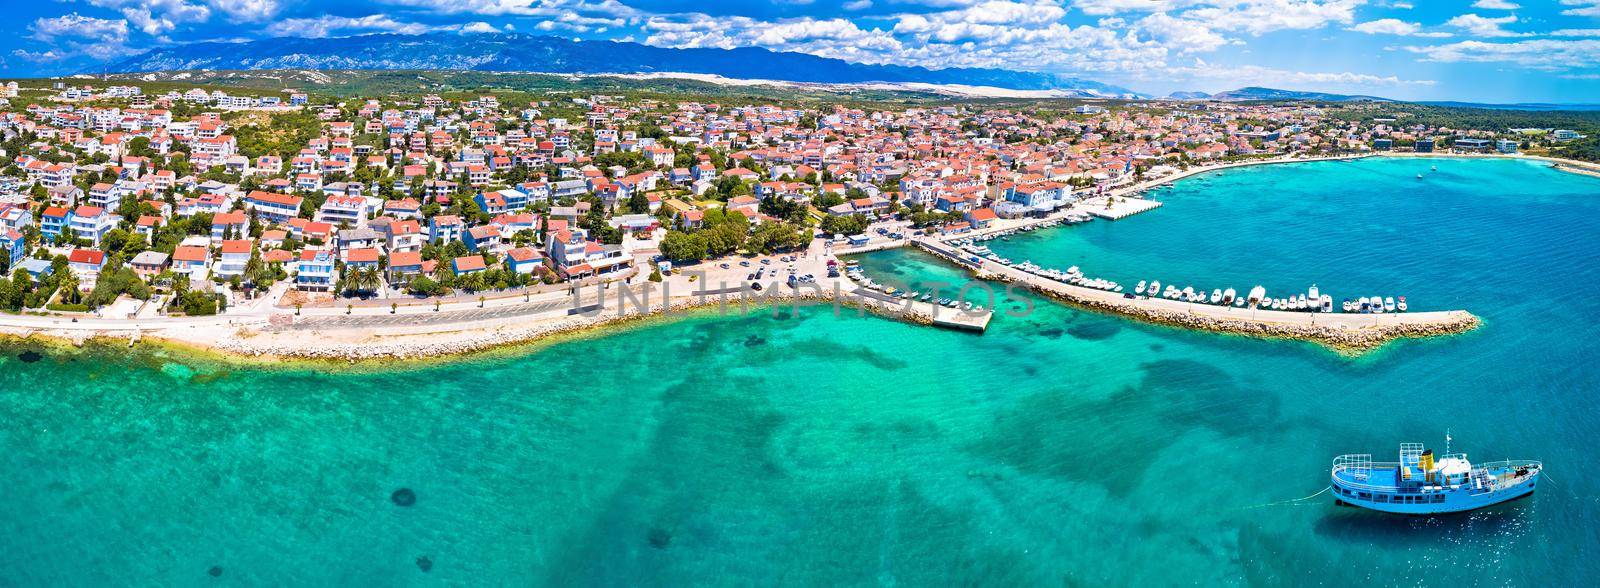 Town of Novalja beach and waterfront on Pag island aerial panoramic view by xbrchx